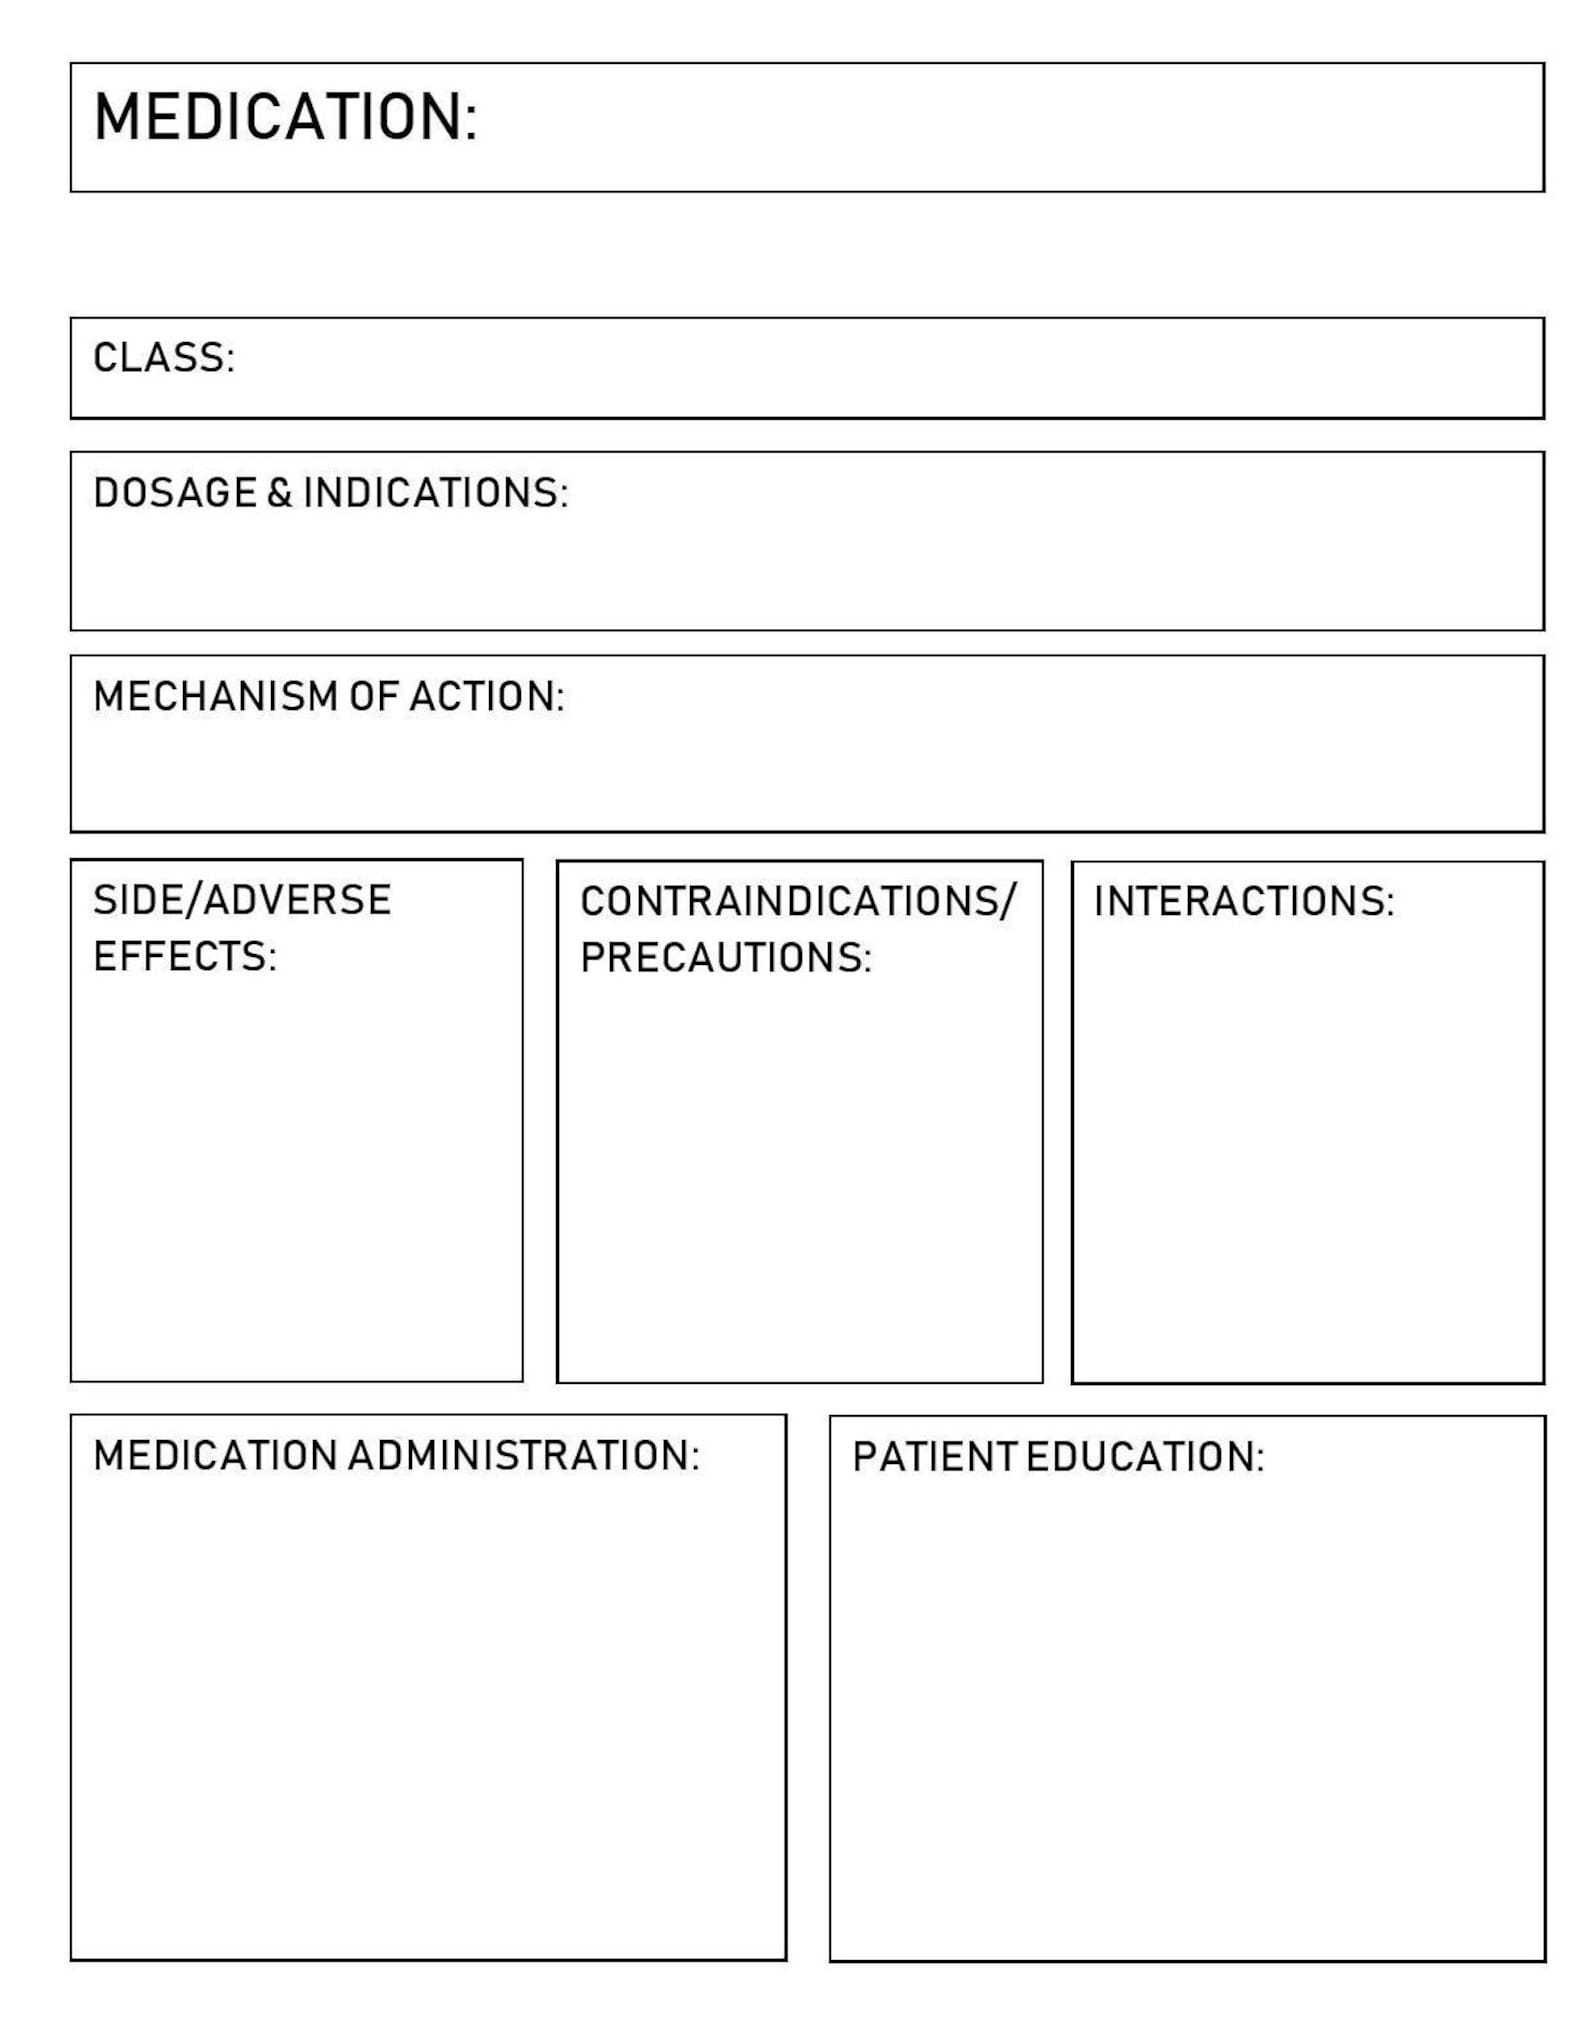 pharmacology-notes-templates-great-for-nursing-students-etsy